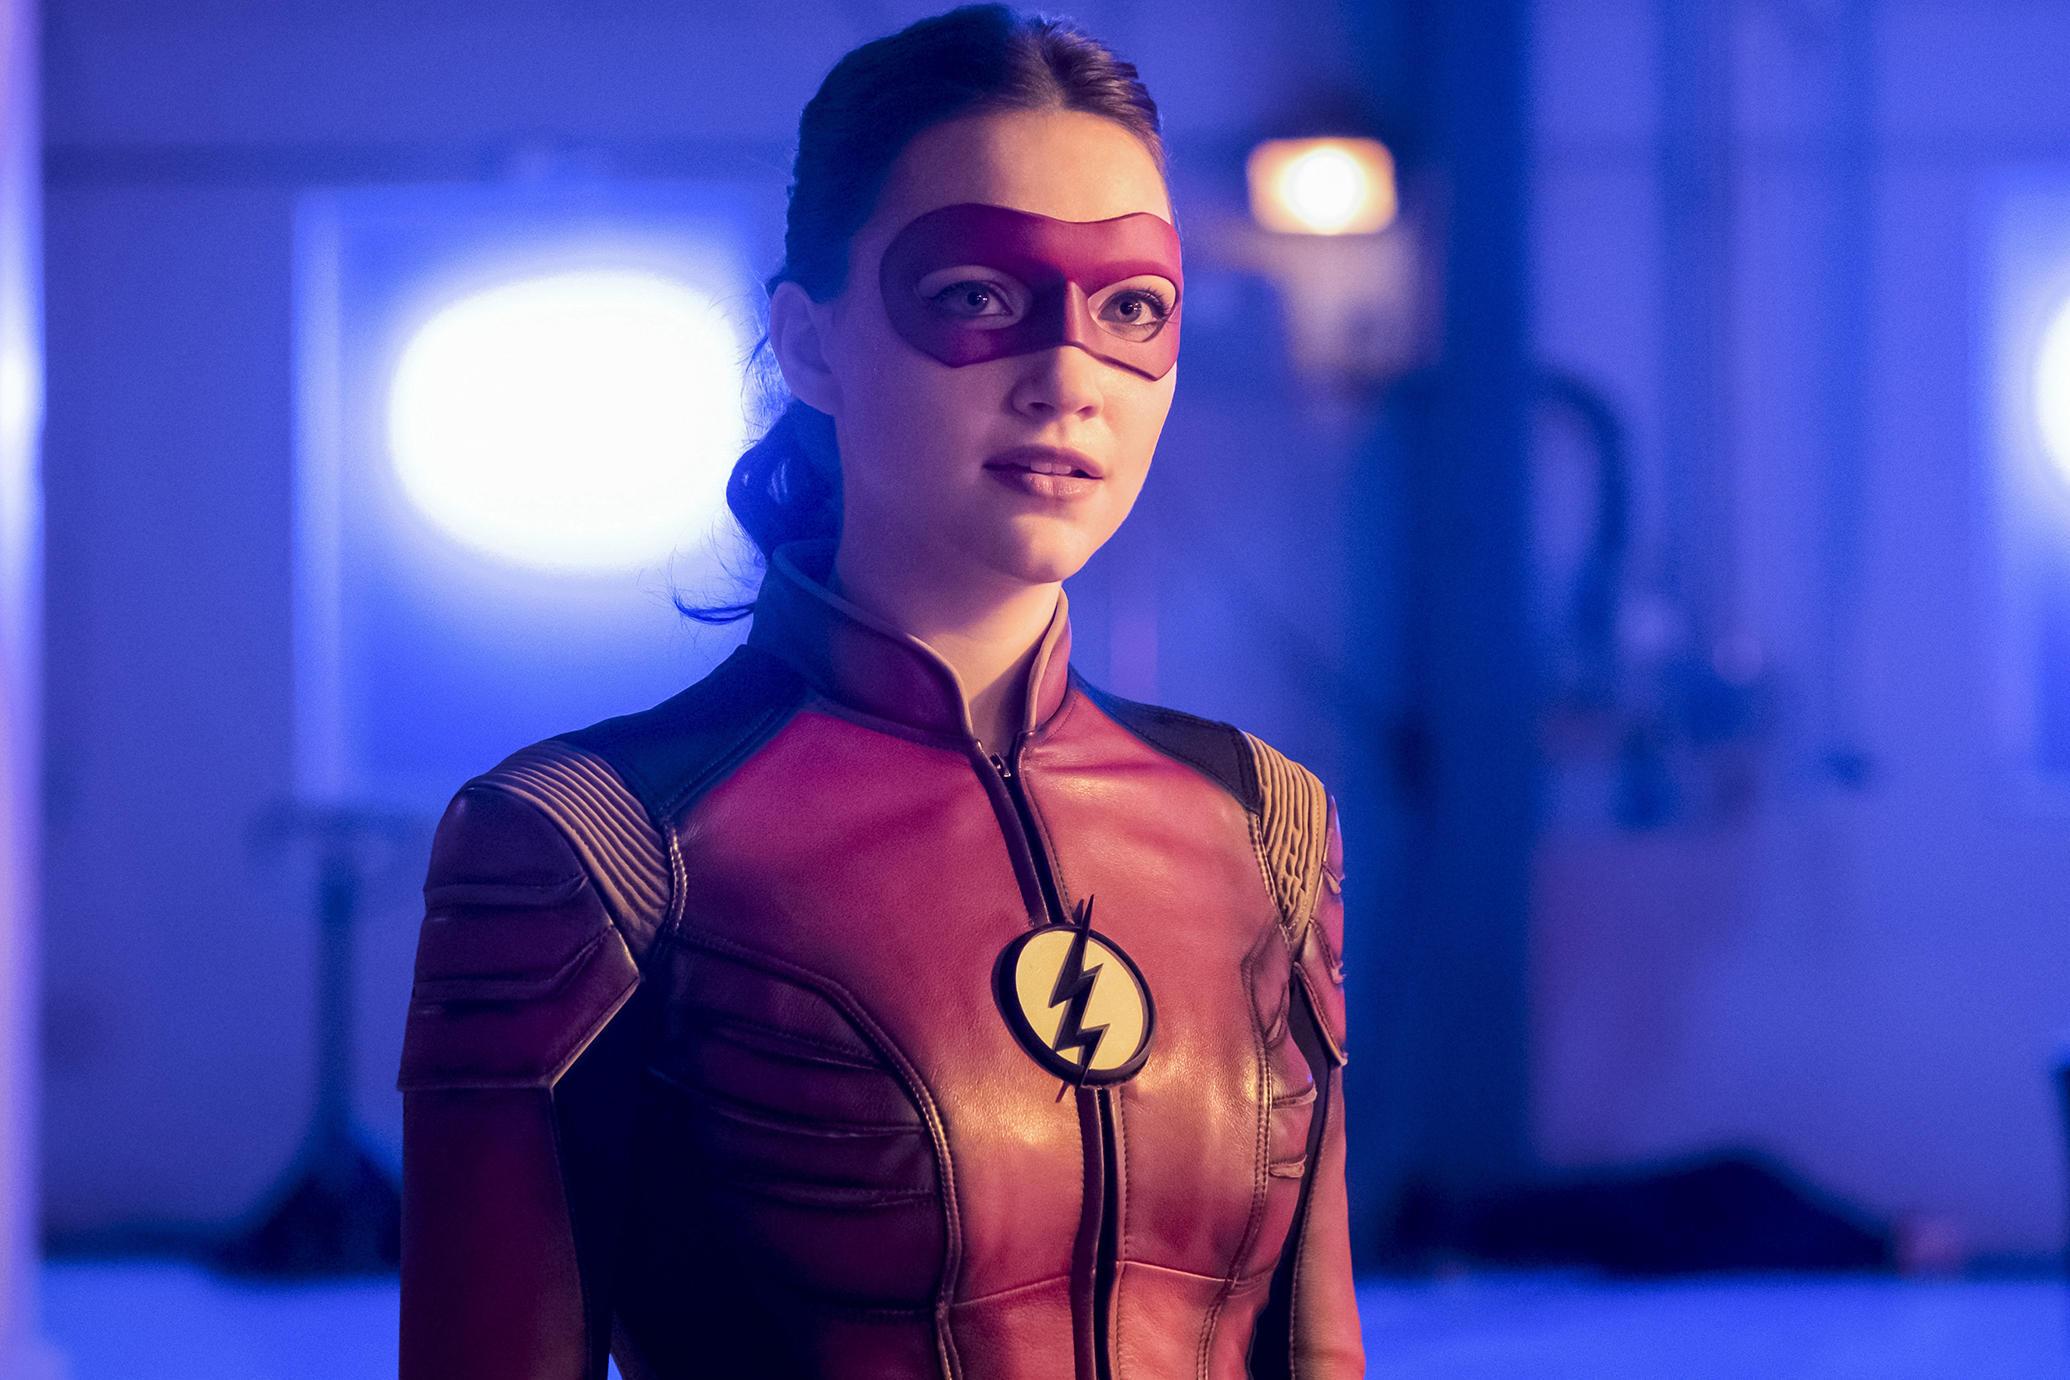 65+ Hot Pictures of Violett Beane – Jesse Quick In The Flash TV Show | Best Of Comic Books